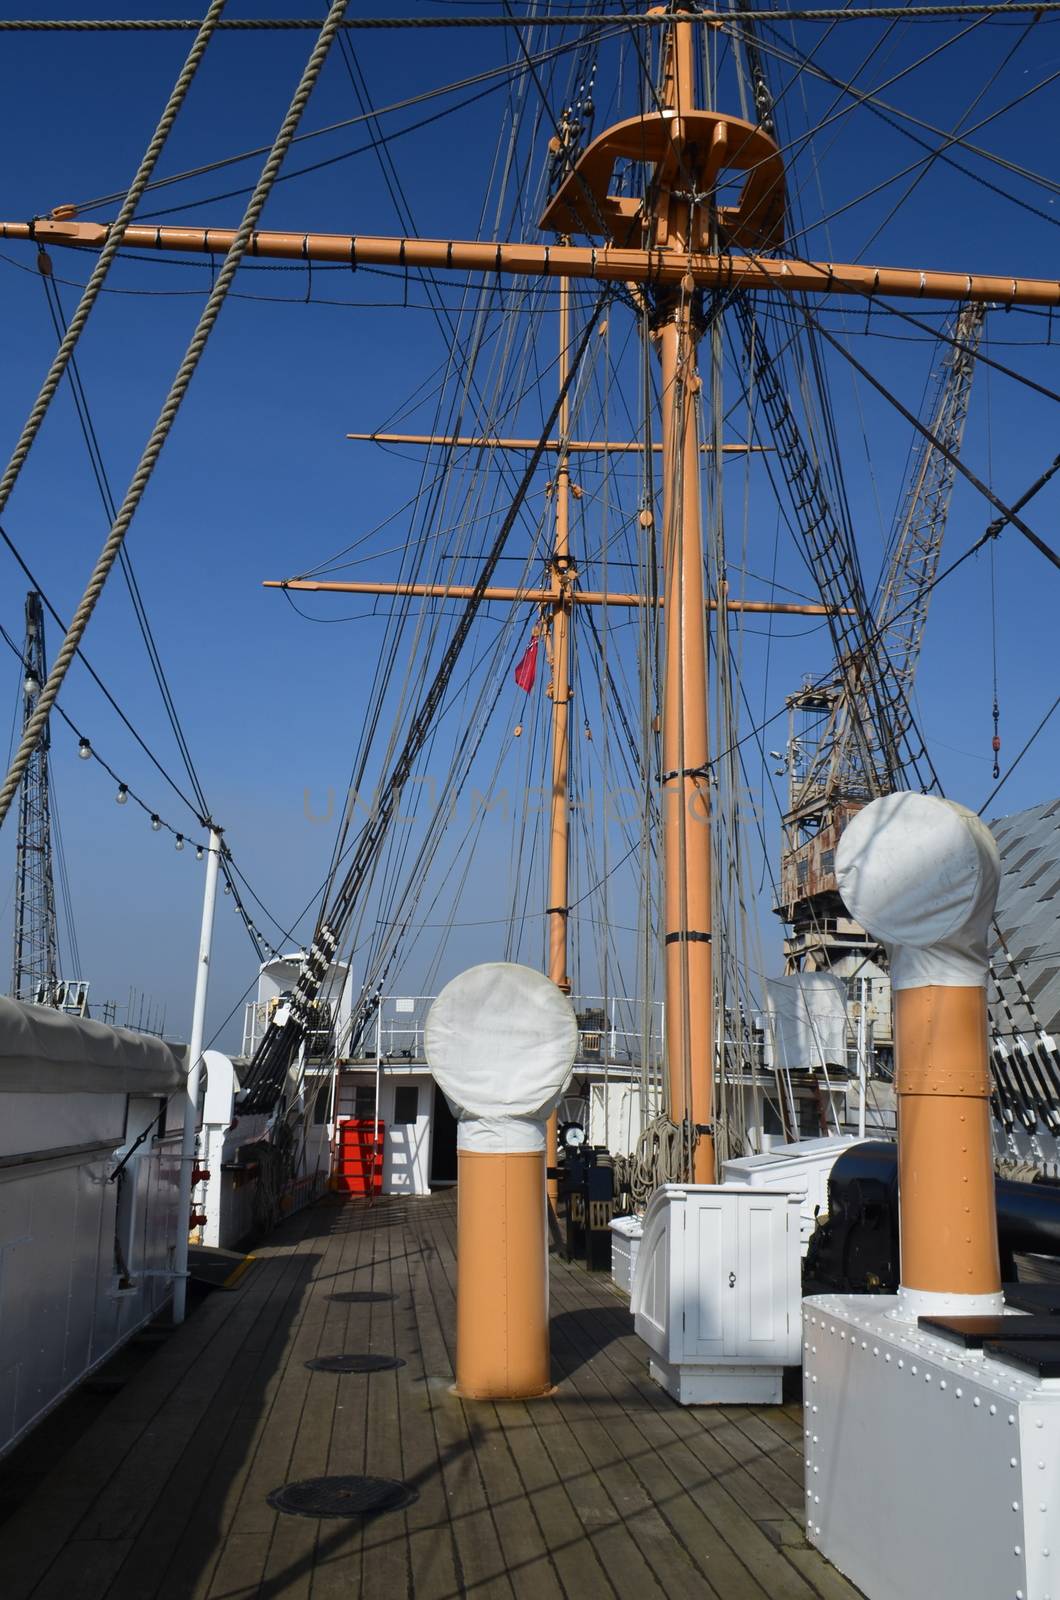 HMS Gannet a British Sloop warship now preserved at Chatham Historic Dockyard in Kent,England.